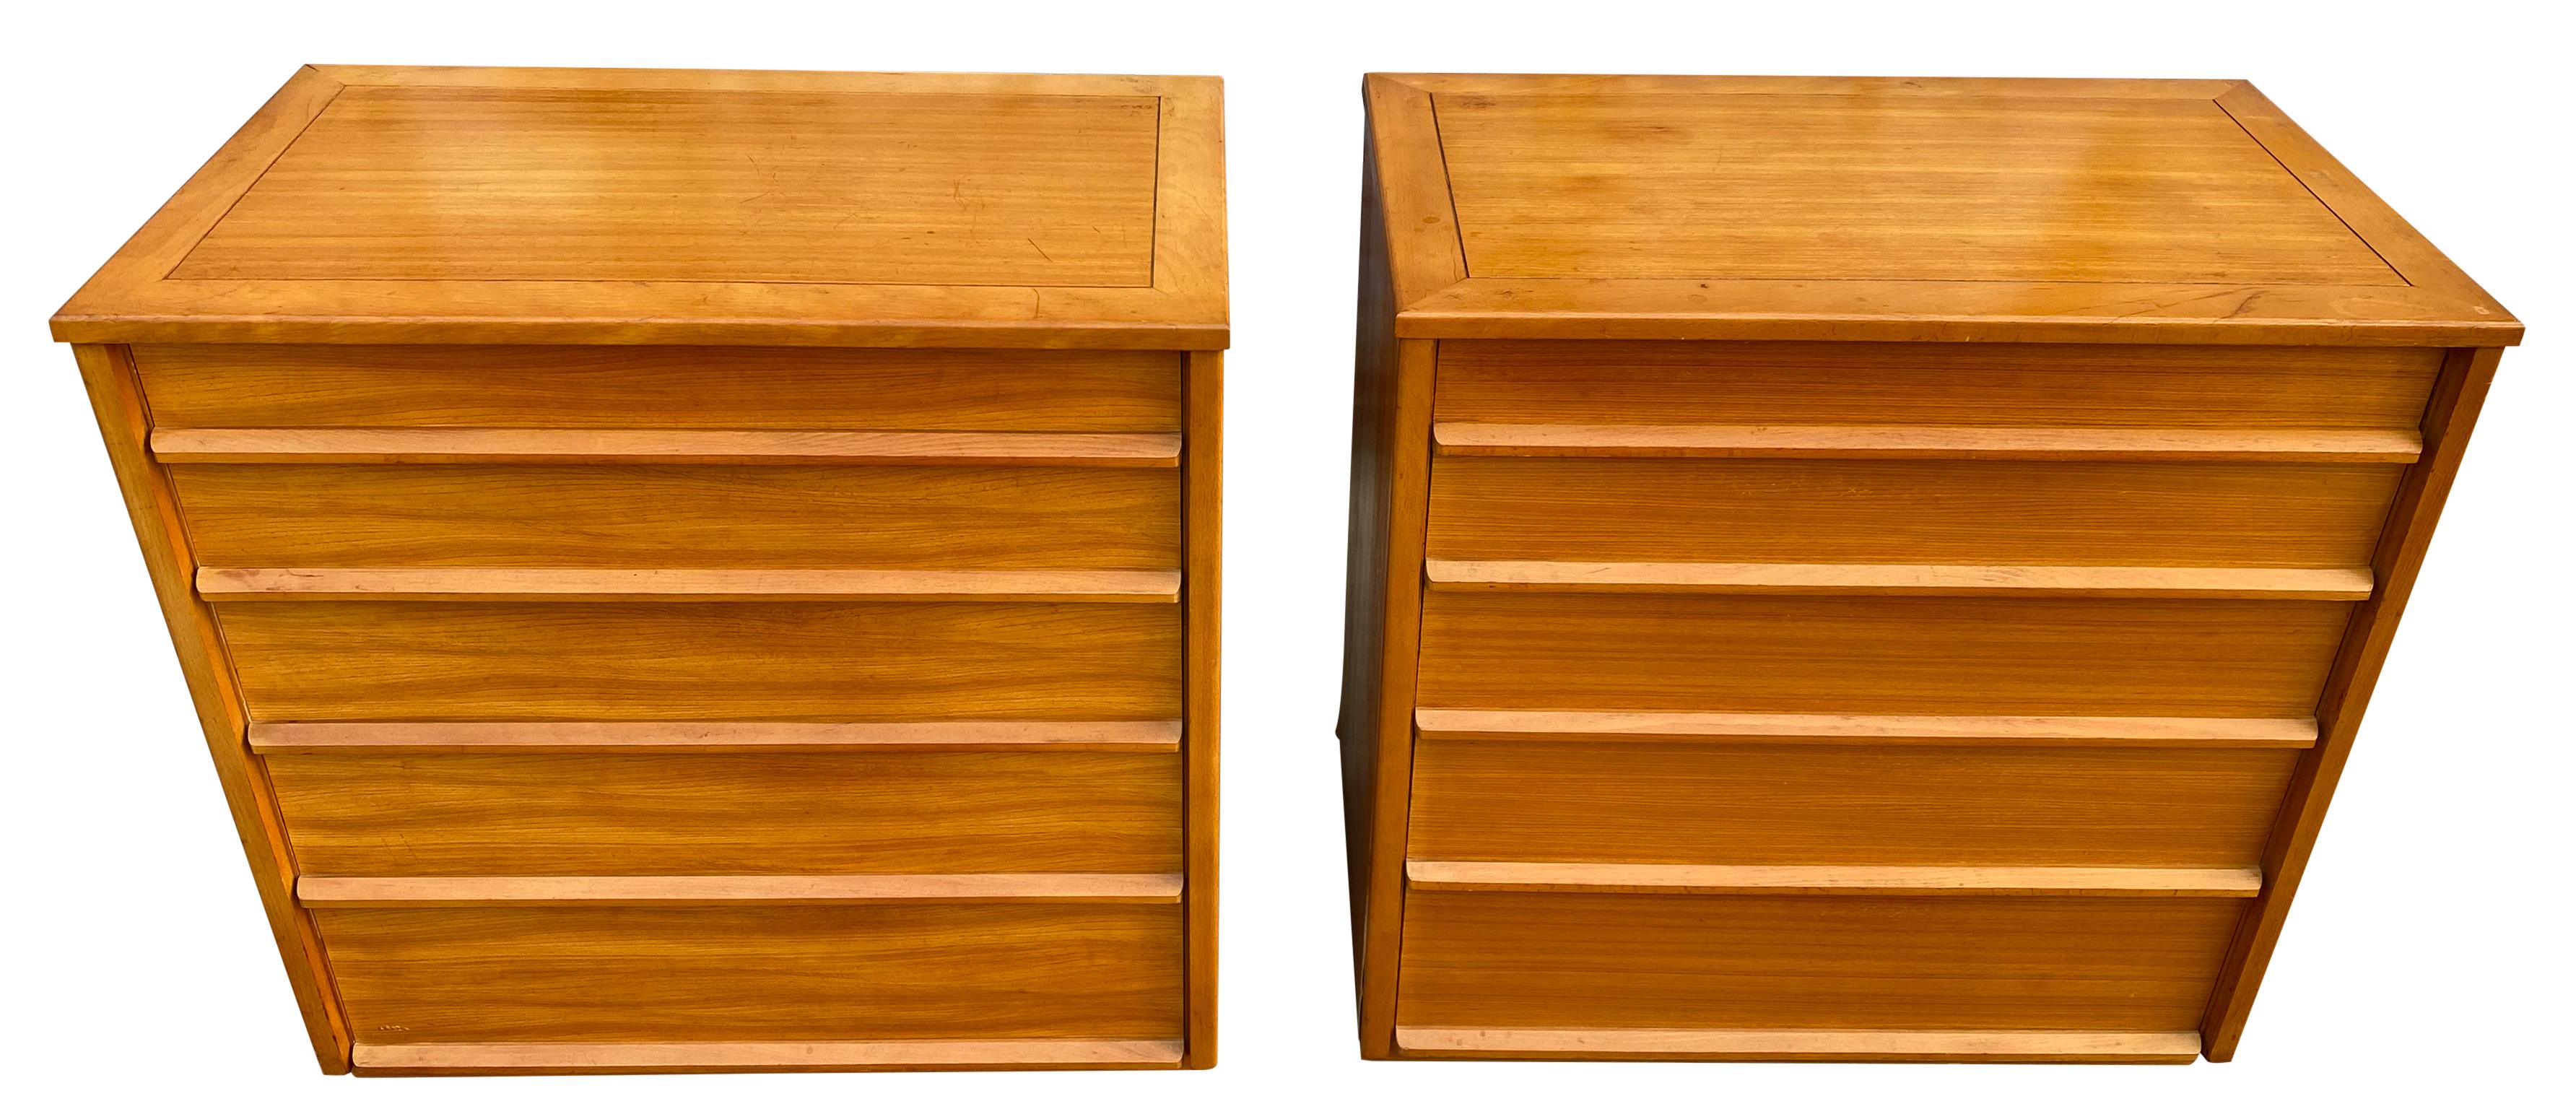 Simple pair of Mid-Century Modern 5-drawer maple blonde dressers very clean. Some drawers have removable wood dividers. All maple blonde construction. All drawers slide smooth and are clean inside. This listing is for (2) dressers (1) pair.